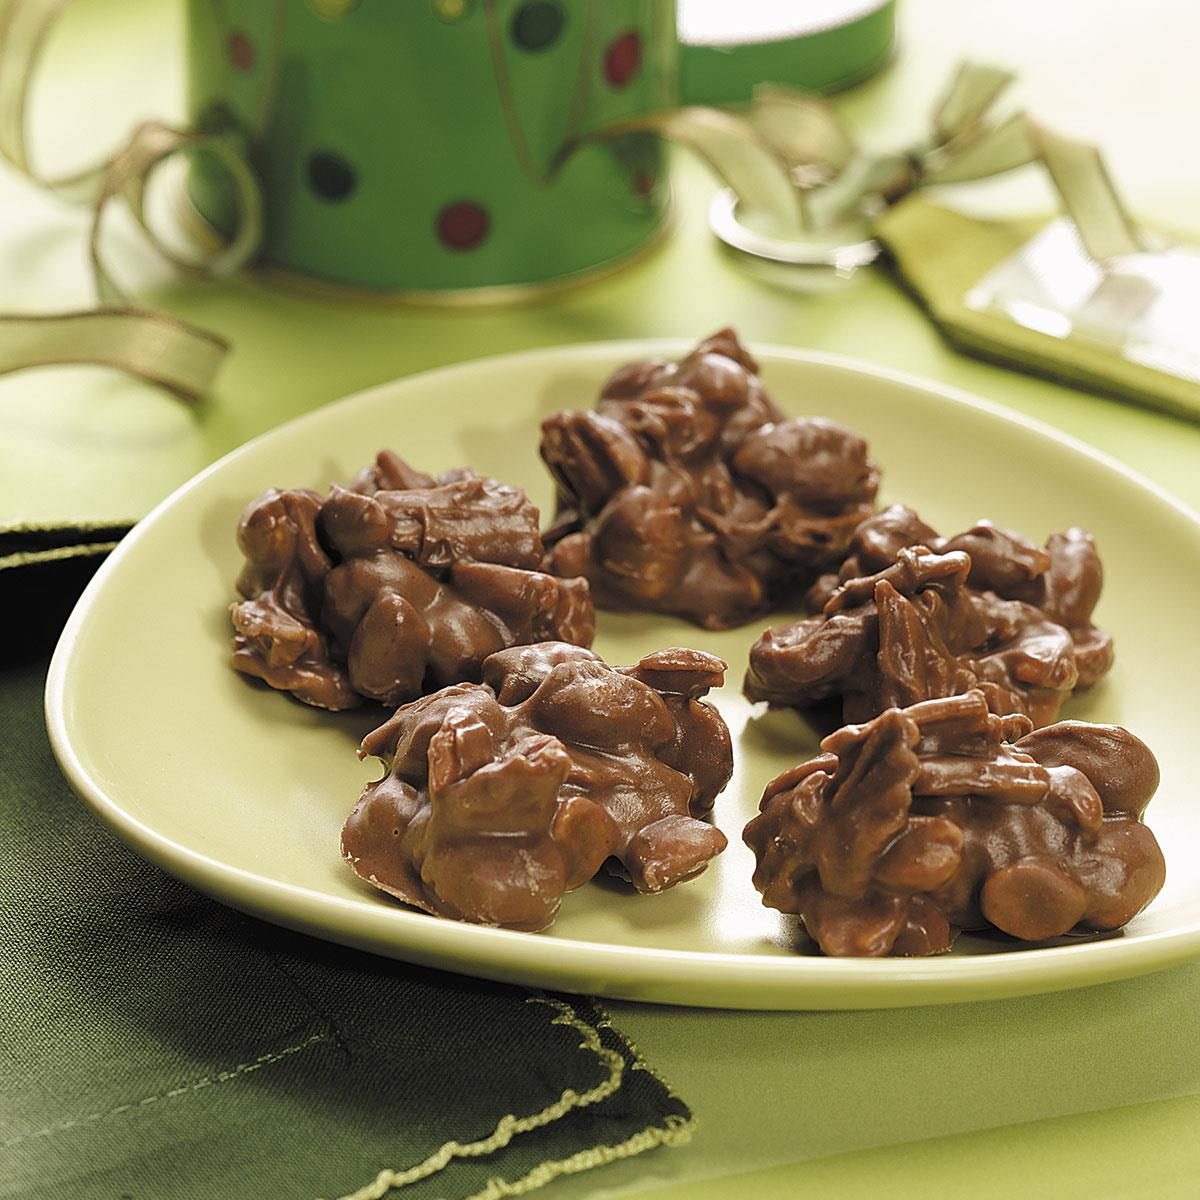 Peanut Butter Clusters Recipe: How to Make It